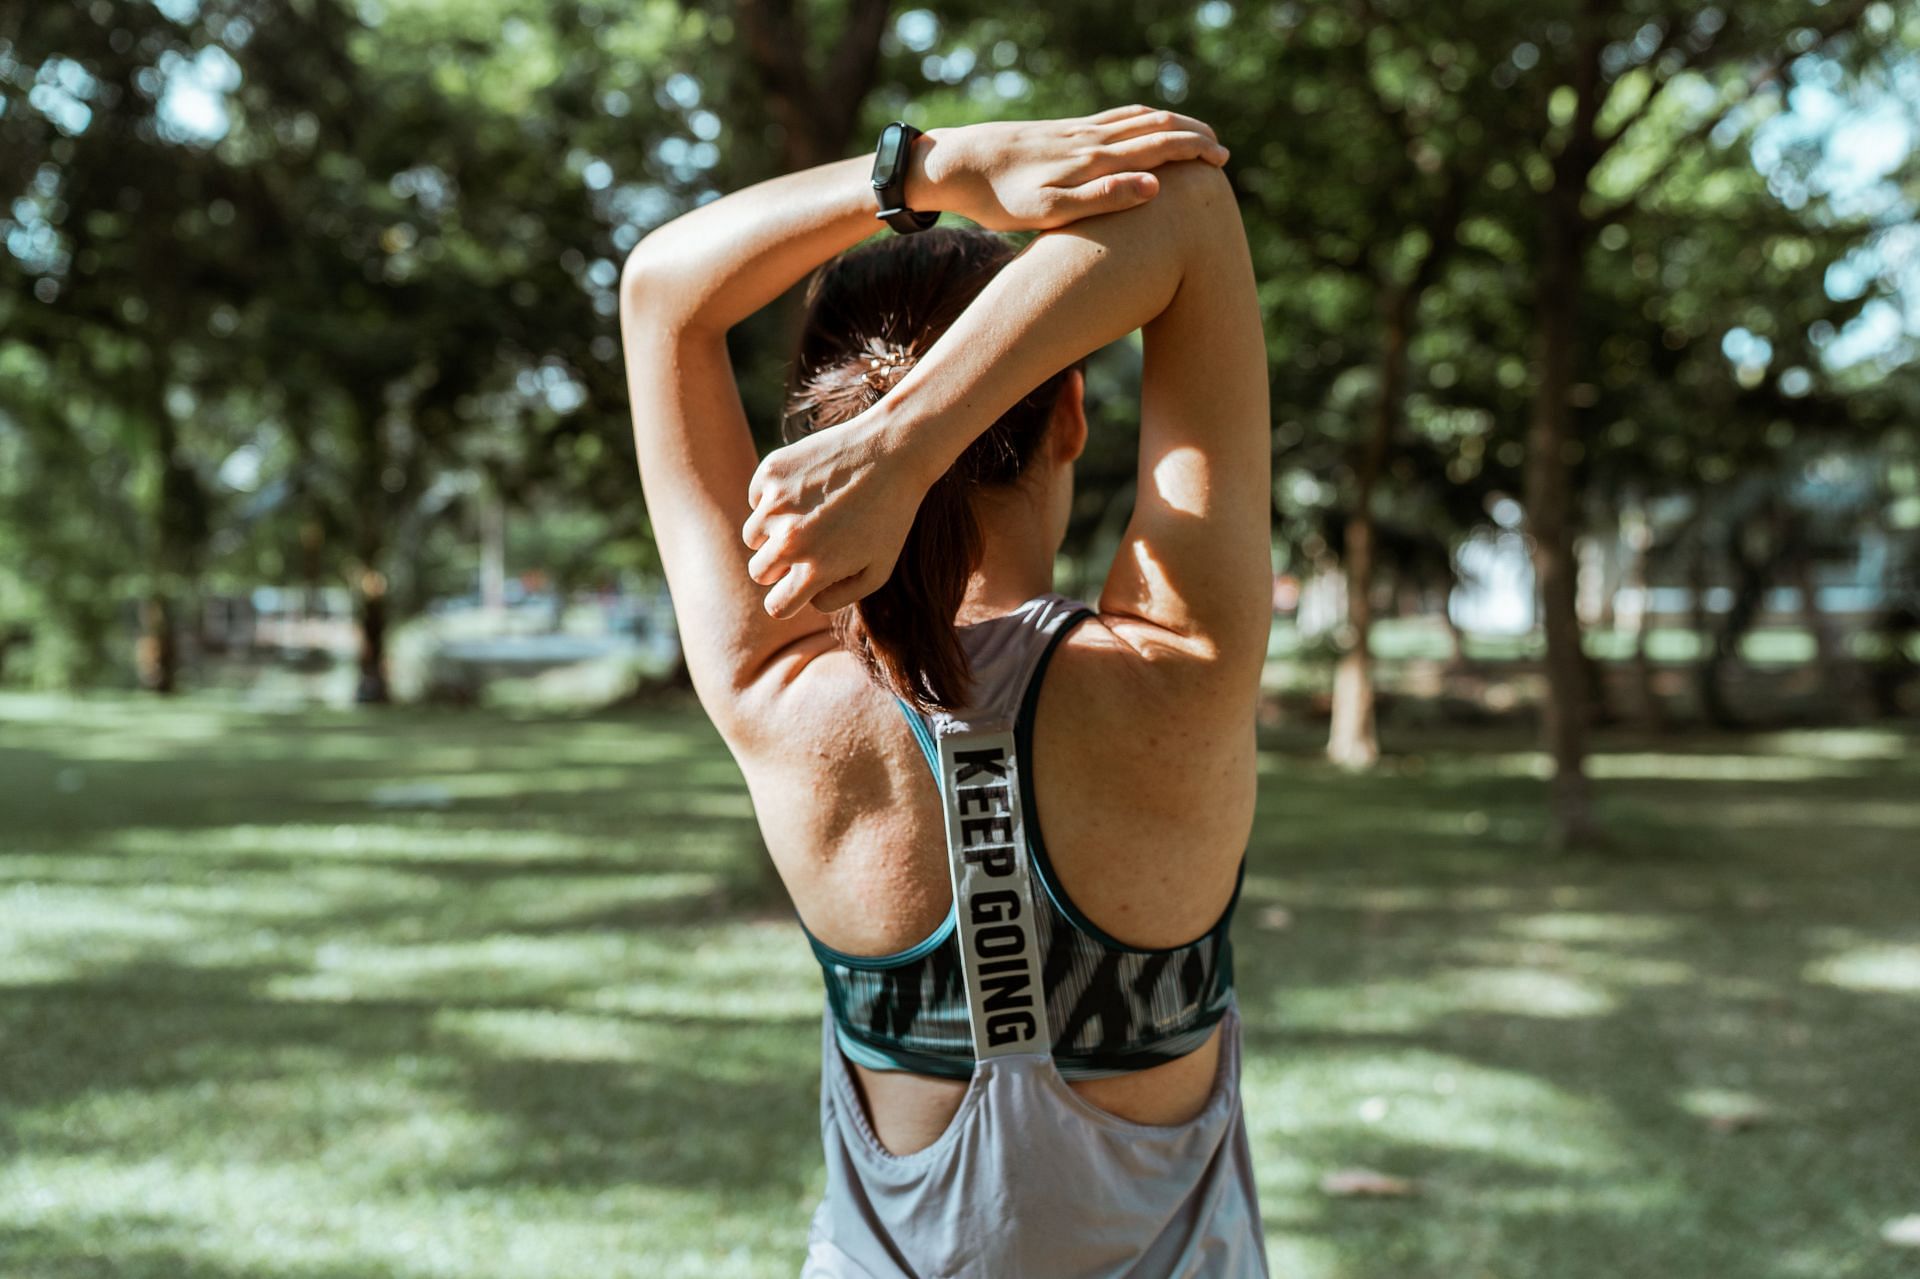 Performing a Blogilates weightless arm workout is too simple. (Image via Pexels/ Ketut Subiyanto)